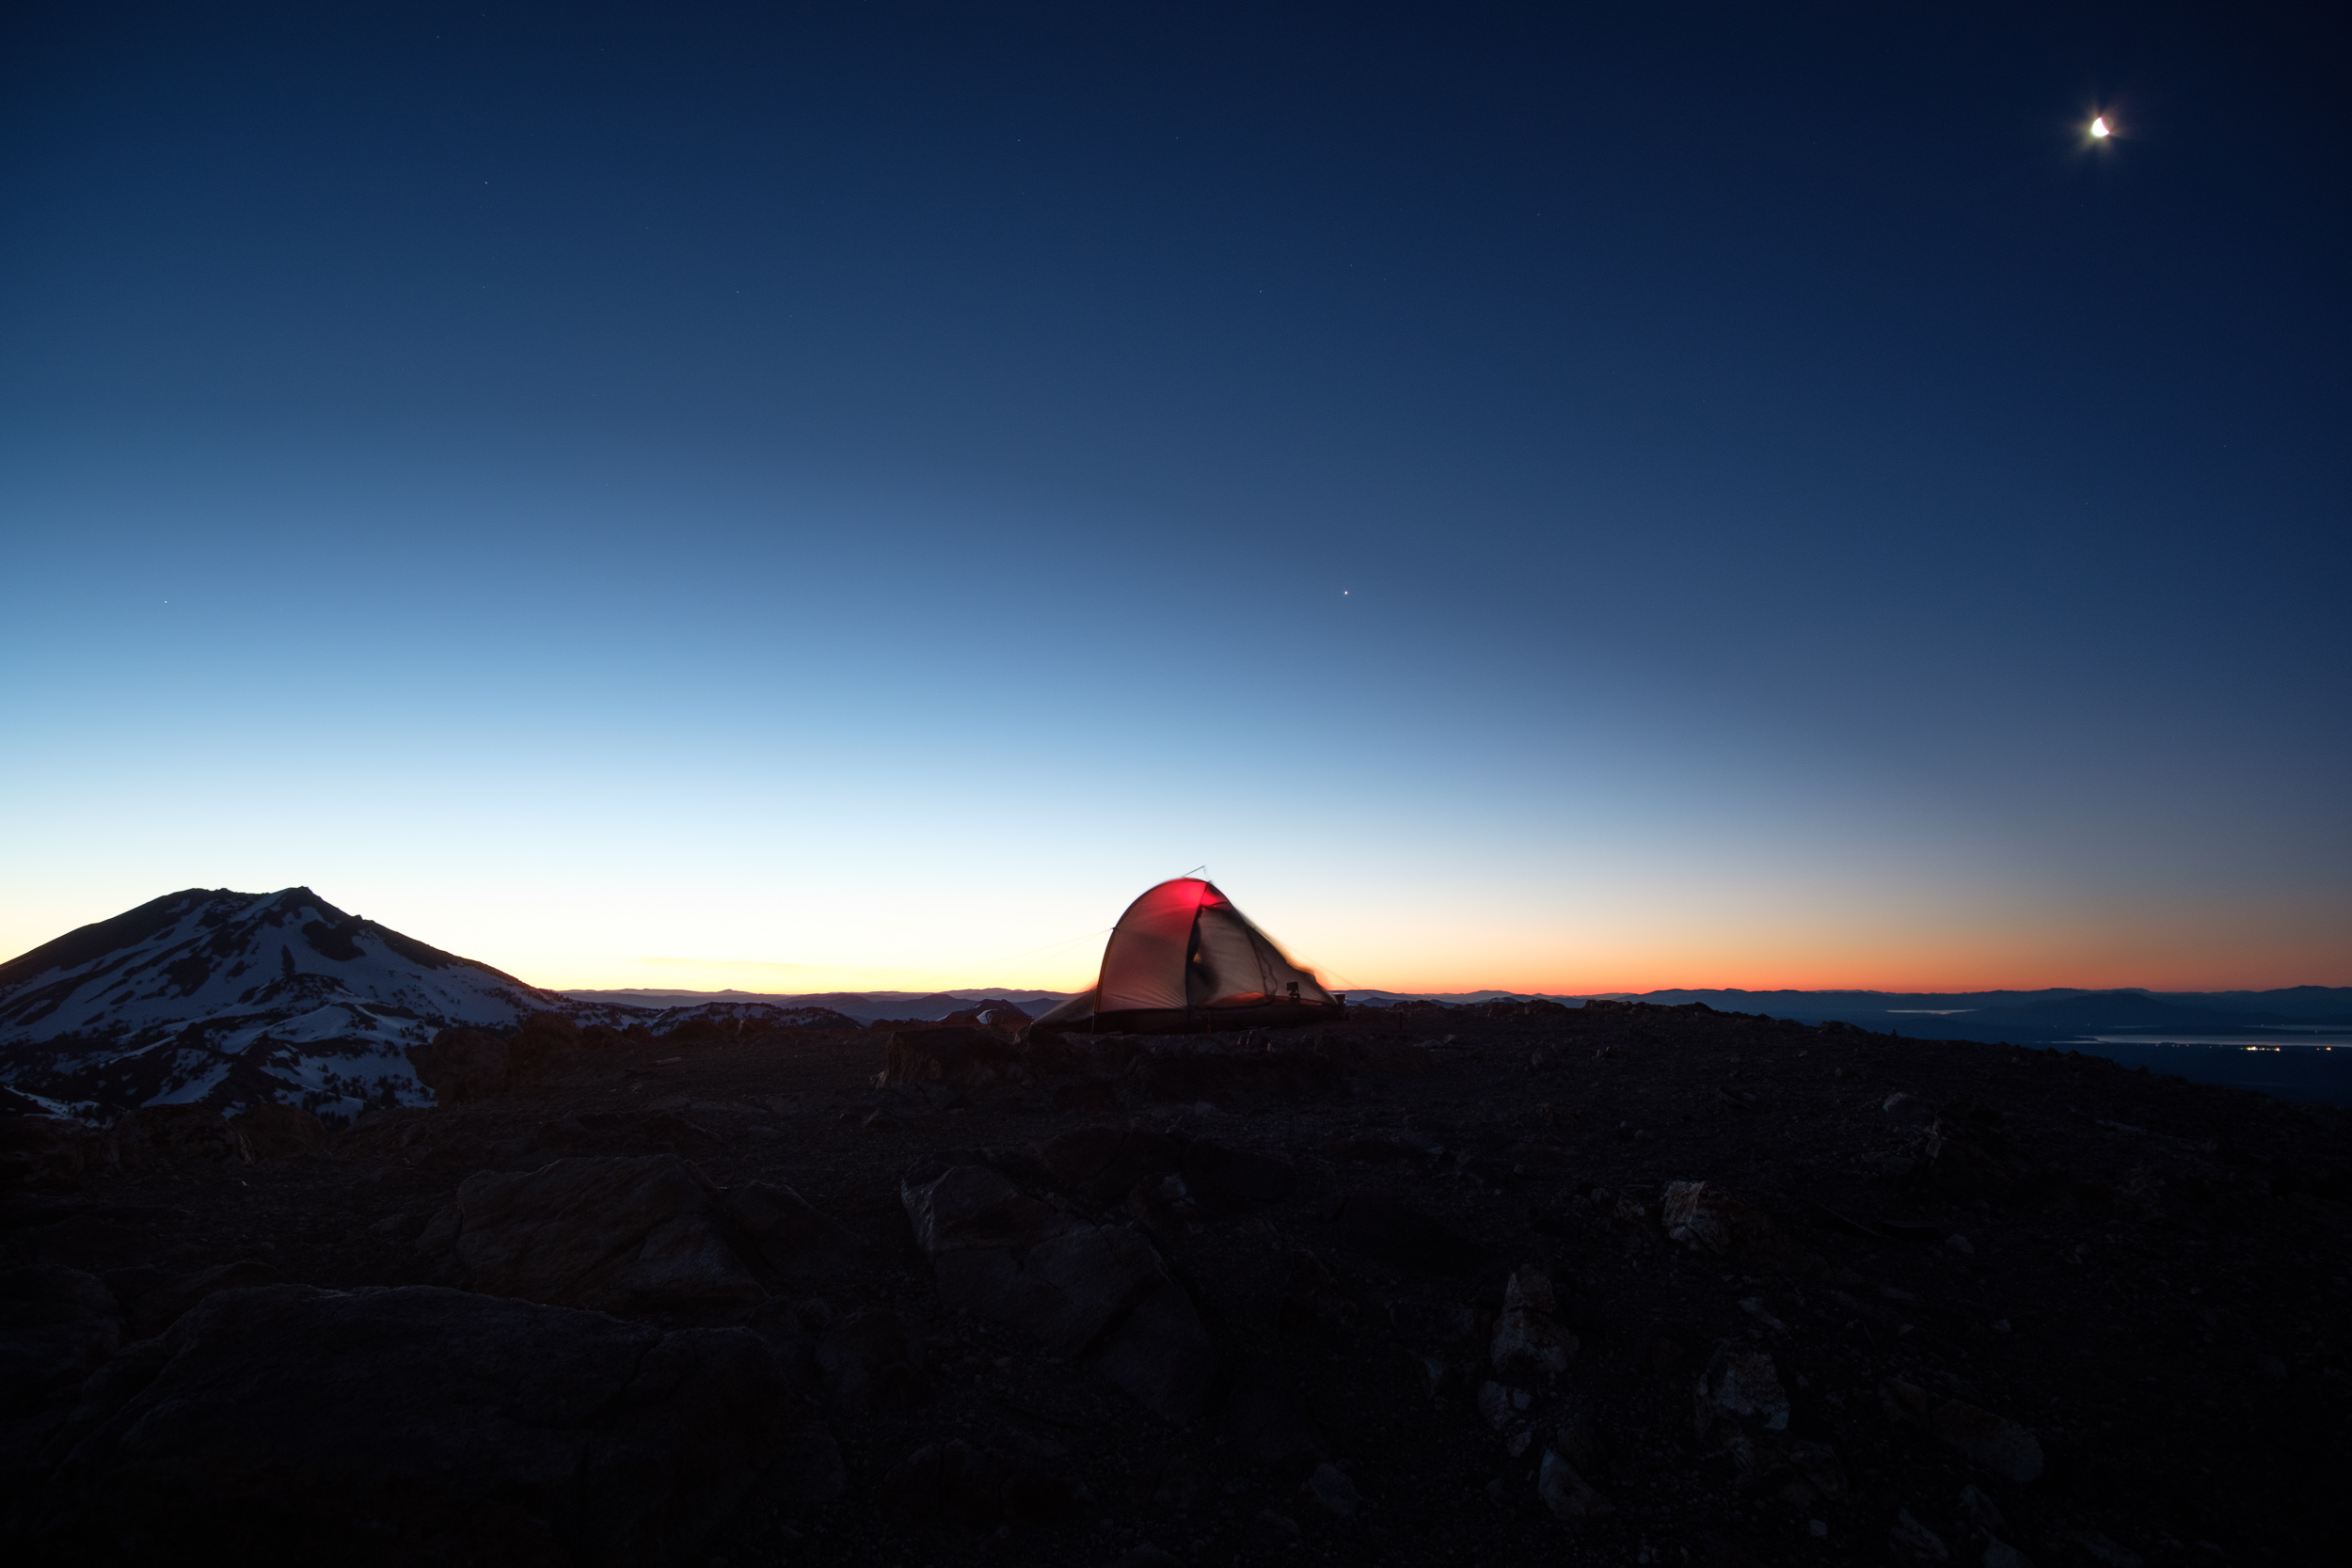  My tent leaning from high winds on the summit of Brokeoff Mountain (9,236'). Lassen Peak and the moon in the background. Lassen Volcanic National Park, California. 